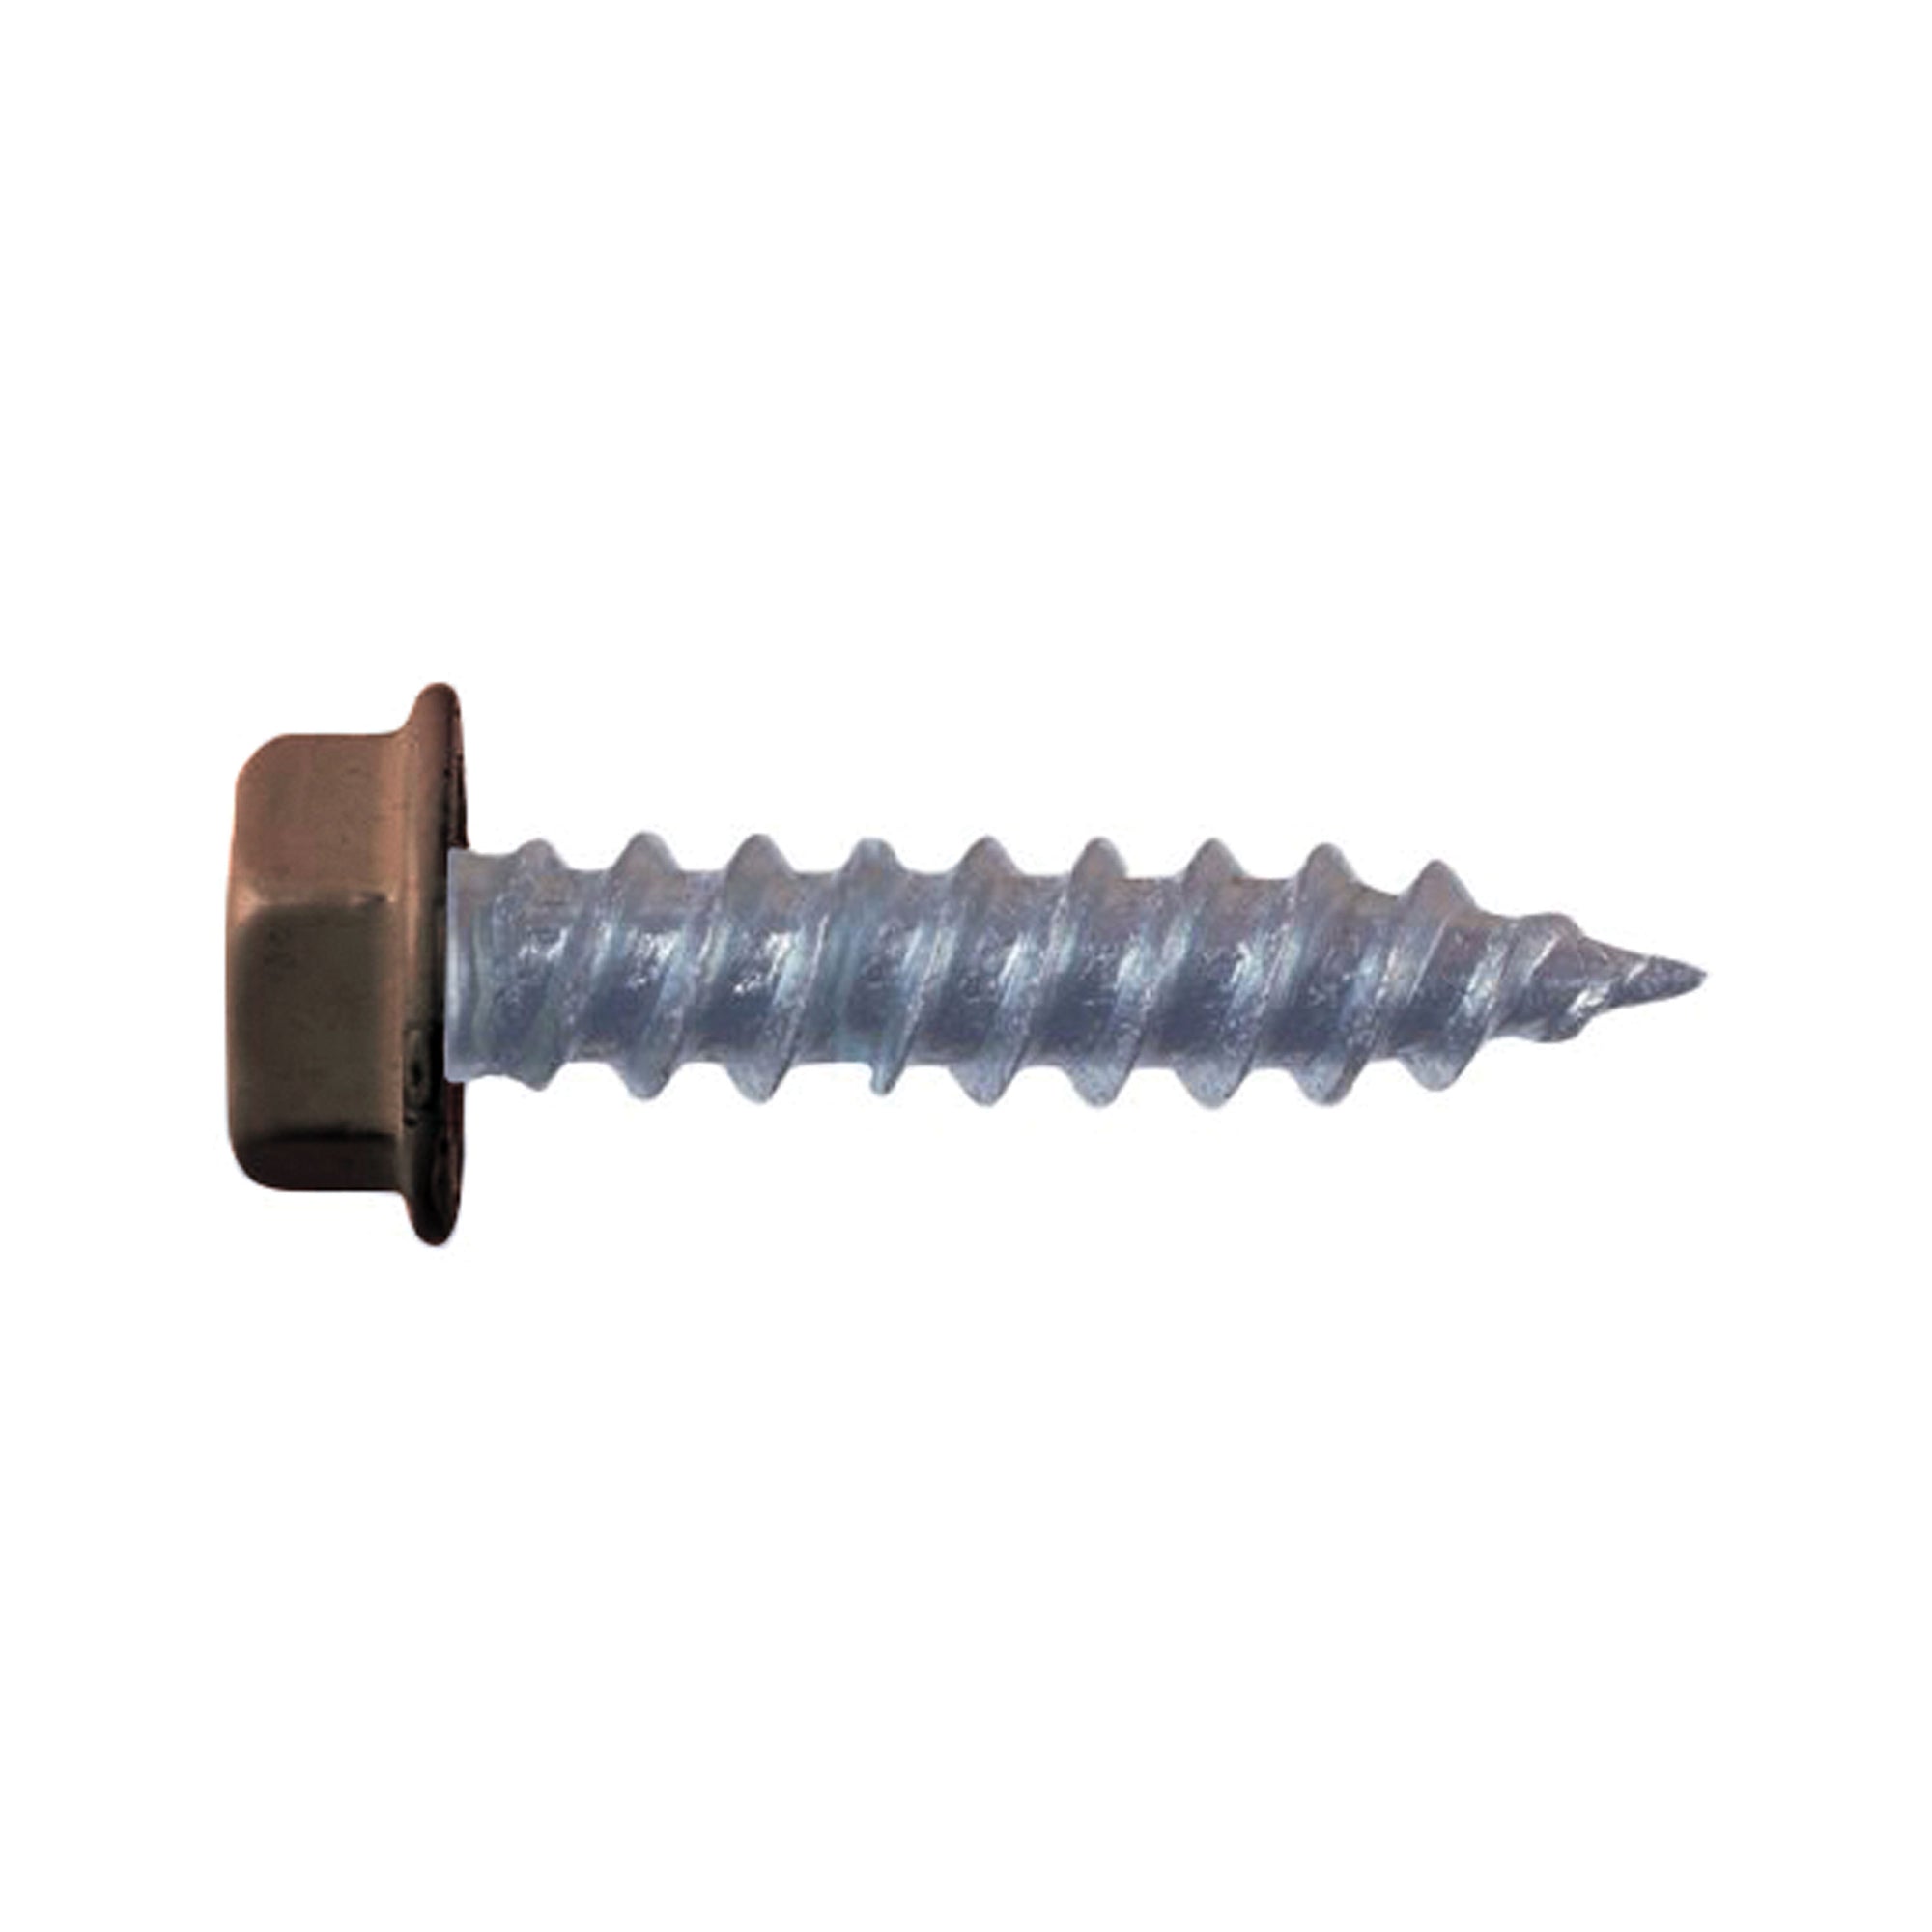 AP Products 012-TR50 BR 8 X 1-1/2 #8 Brown Hex Washer Head Screws, 1-1/2" / Pack of 50